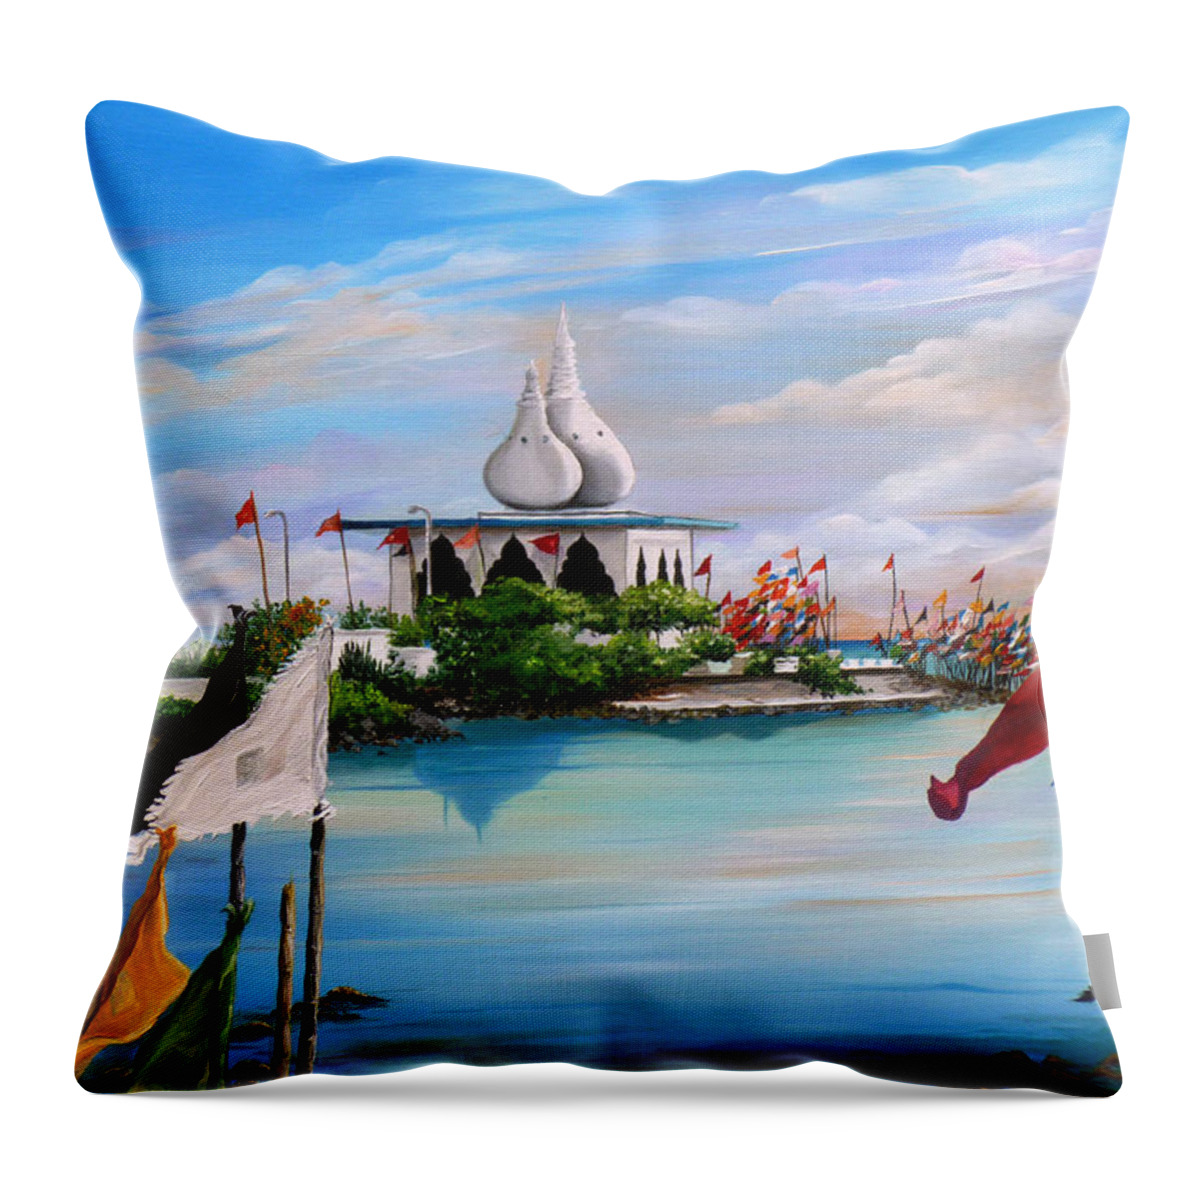 Hindu Temple Throw Pillow featuring the painting Prayers At Waterloo by Karin Dawn Kelshall- Best